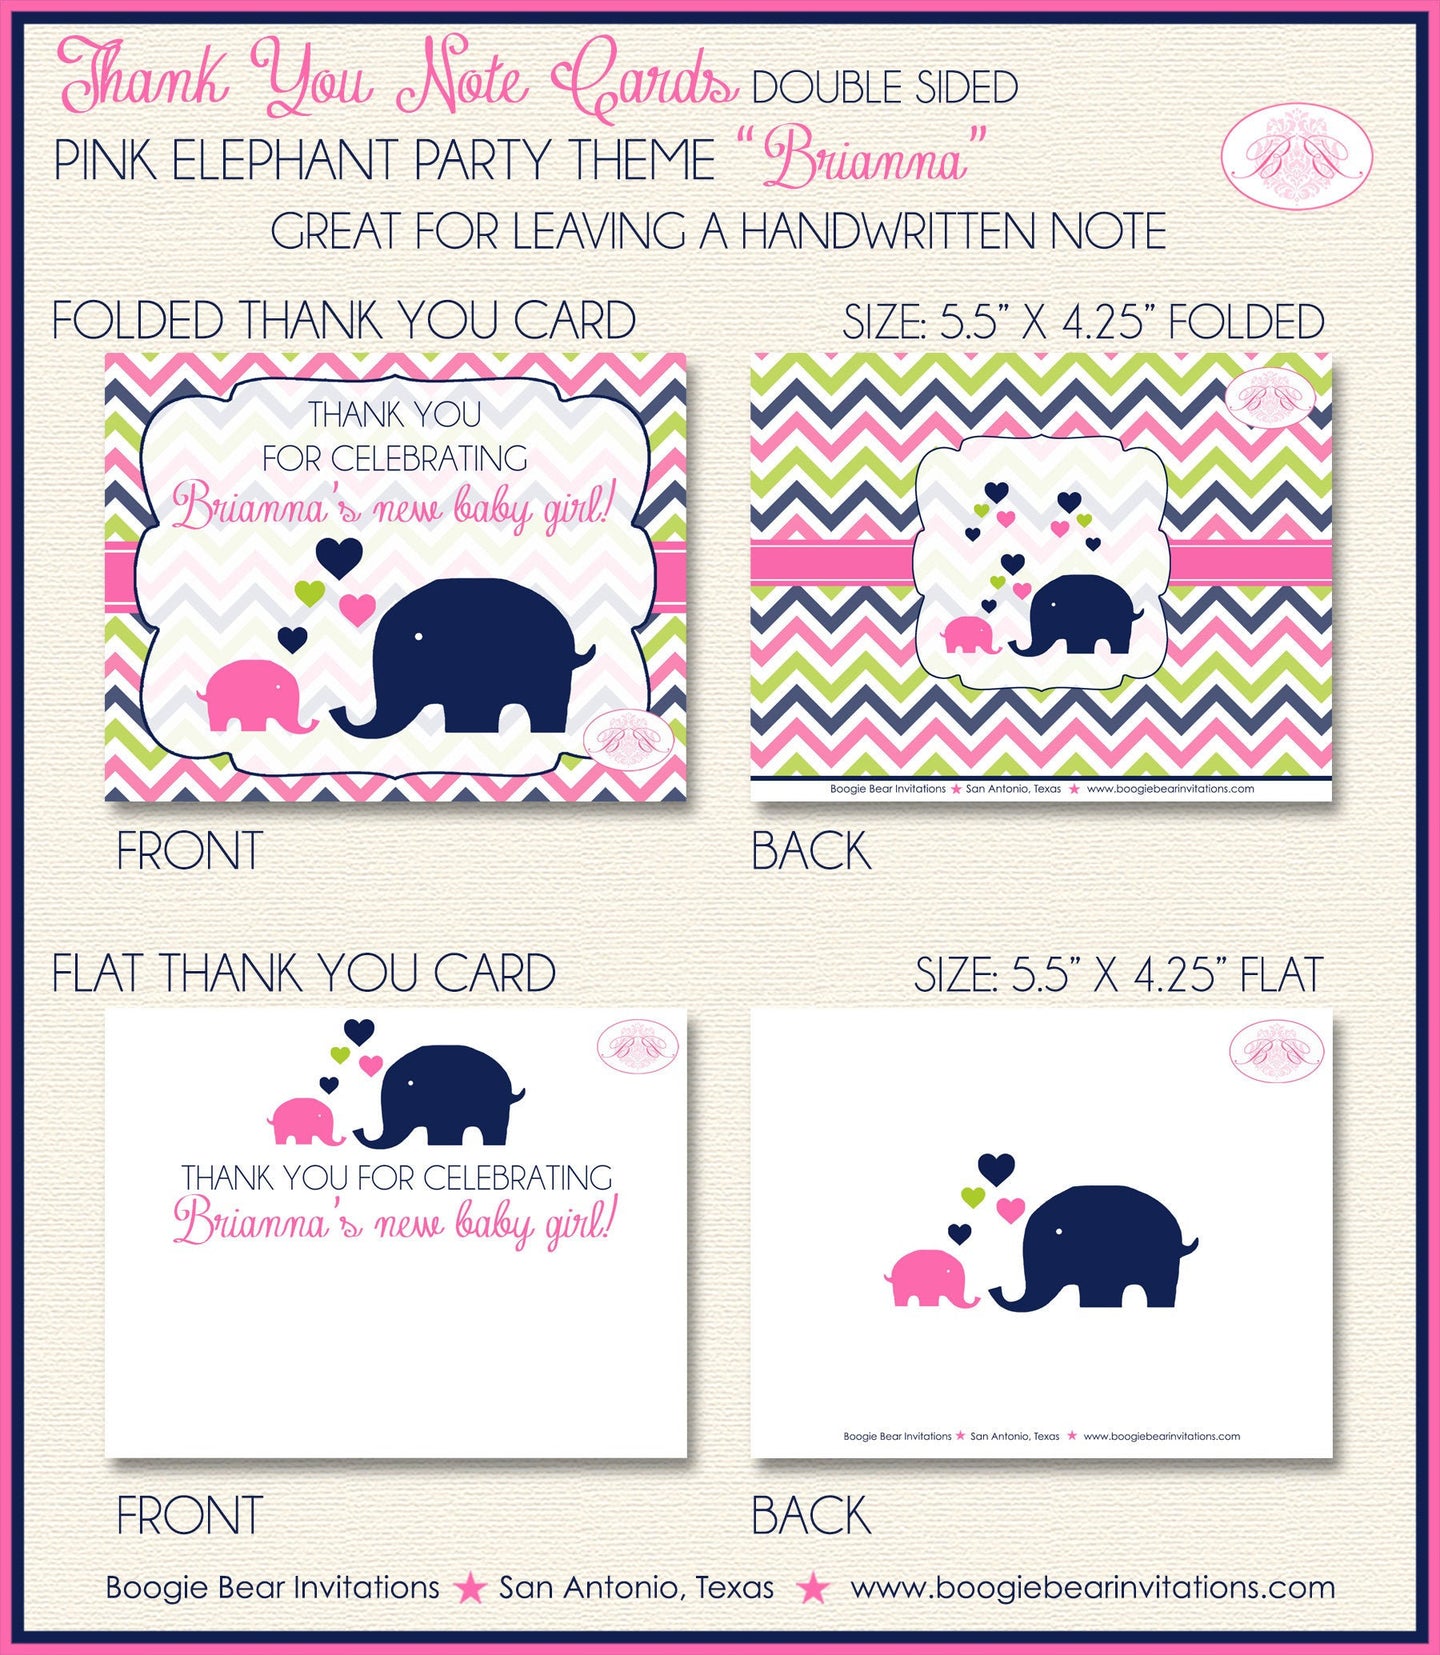 Pink Elephant Baby Shower Thank You Card Note Girl Party Chevron Navy Lime Green Love Girl 1st Boogie Bear Invitations Brianna Theme Printed